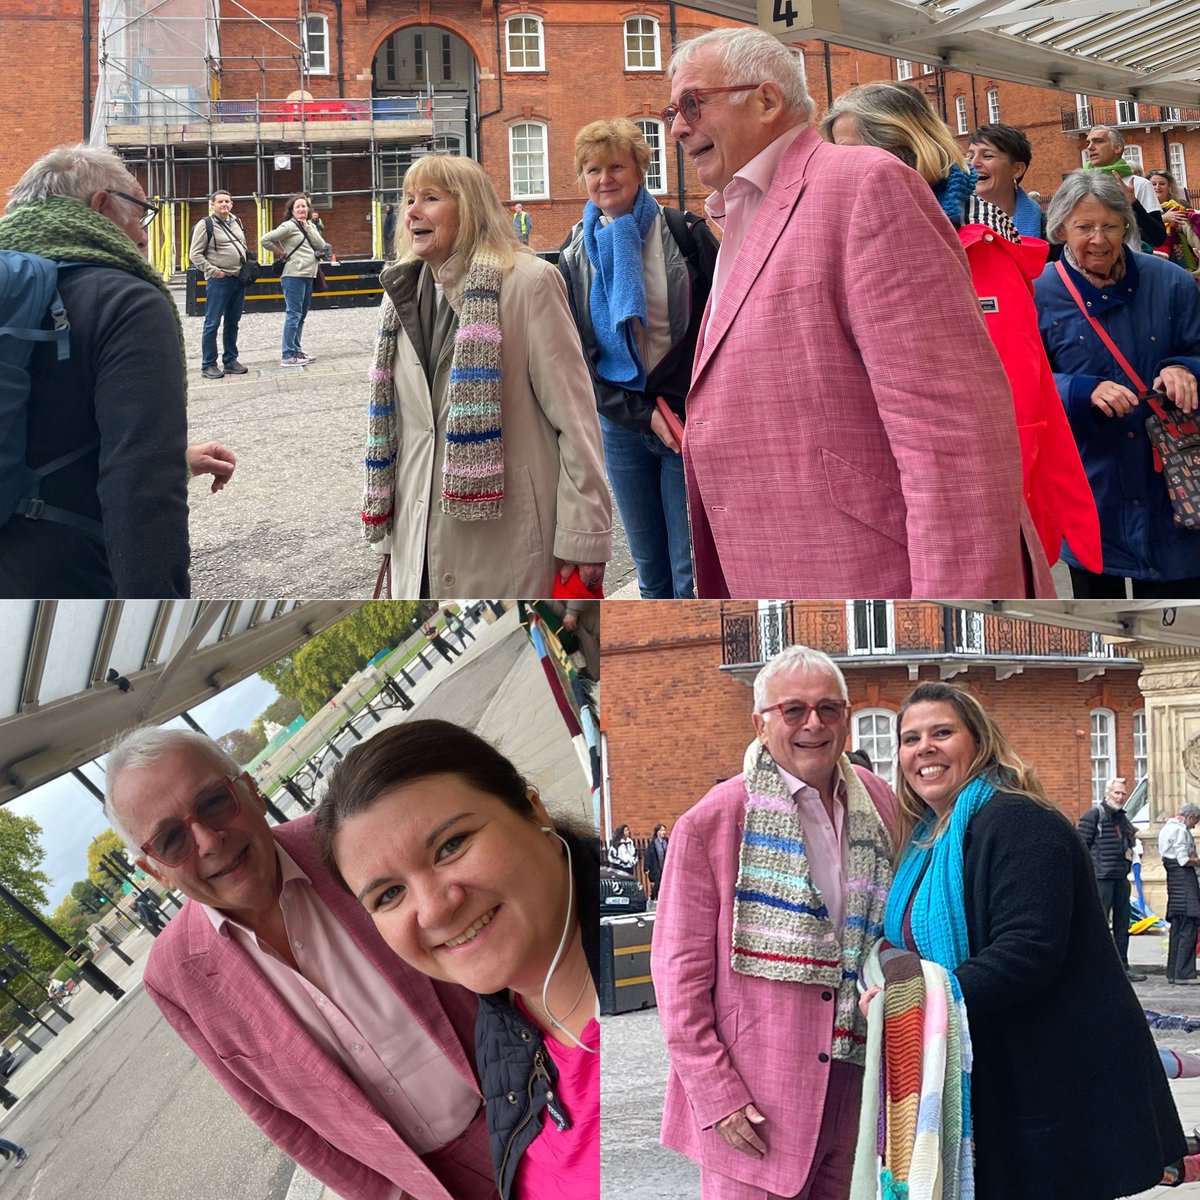 At the @RoyalAlbertHall Hall with @Emmailque @lbsorg raising awareness about the disease wrapping scarves around it! Currently on seven laps! Incredible to be a part of it! Then met Christopher Biggins and Susan Hampshire!

#AScarfForLewy #christopherbiggins #susanhampshire #lbd